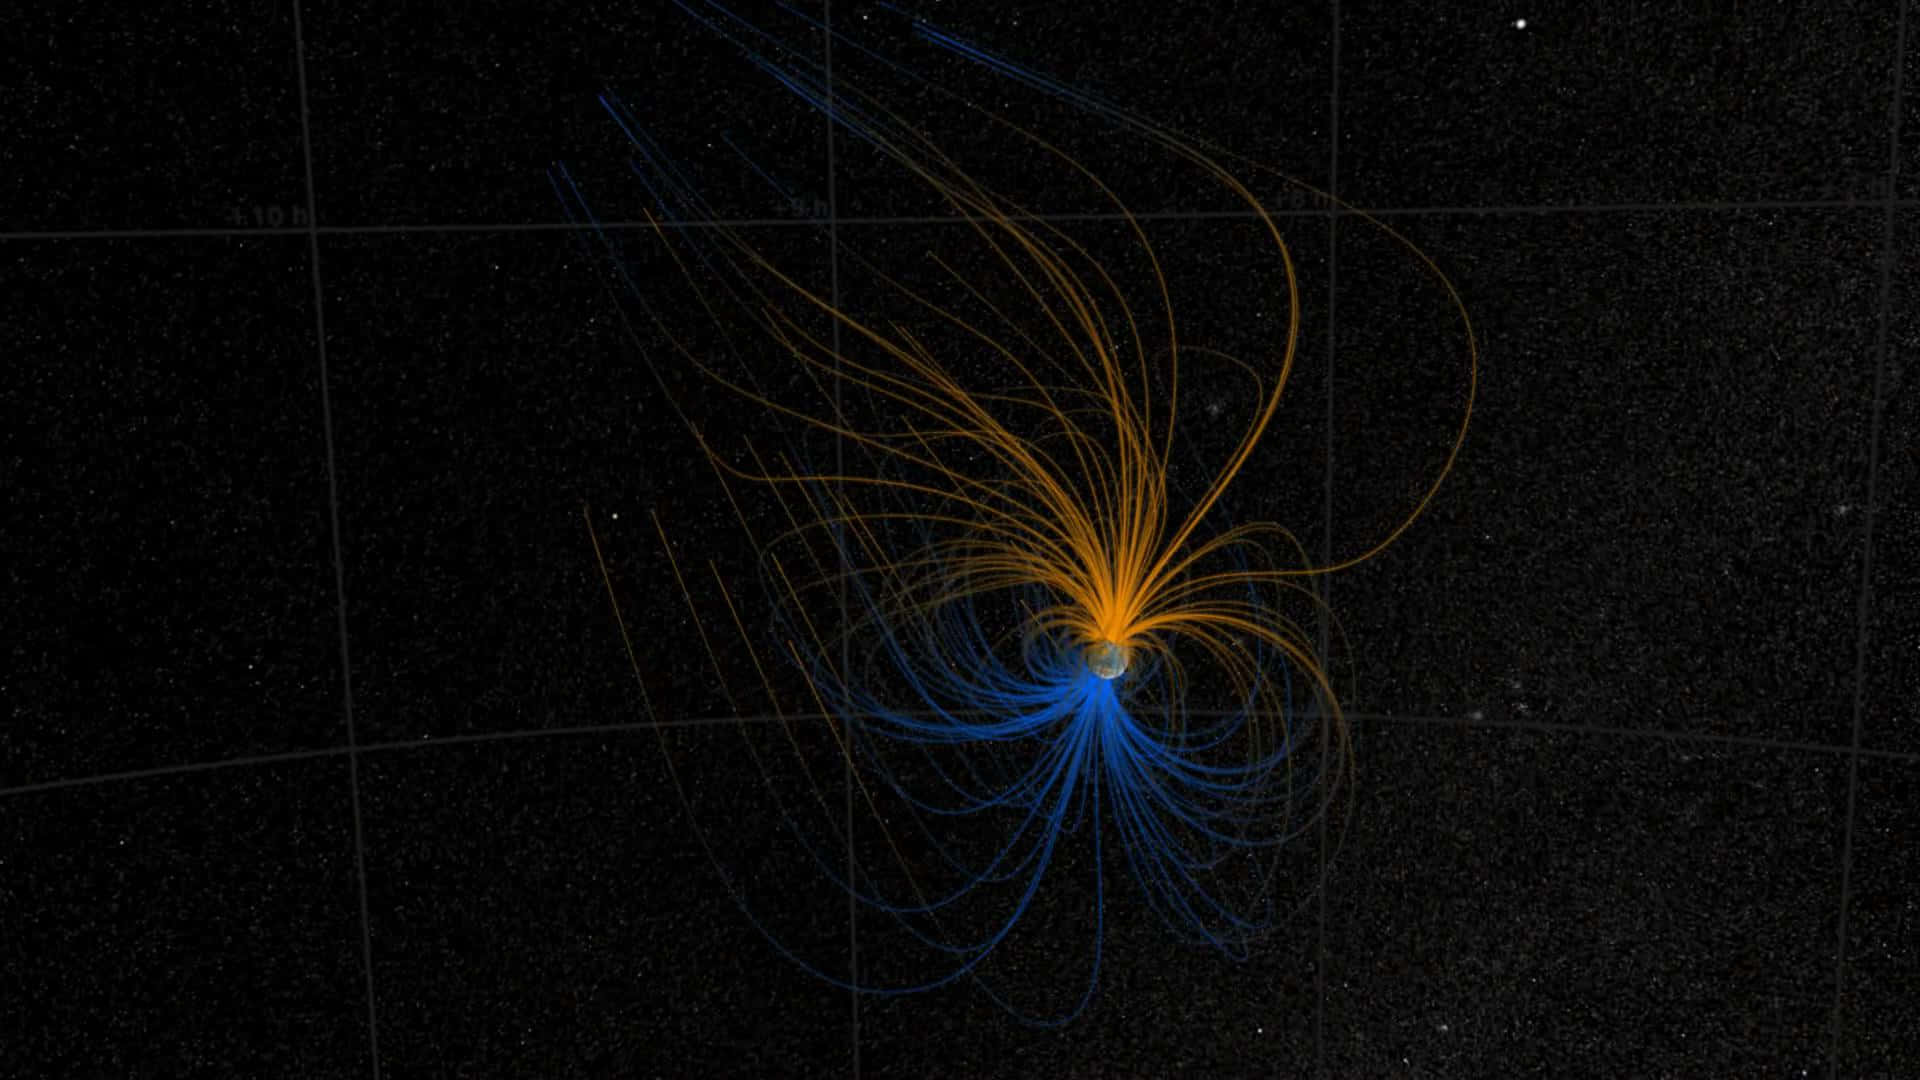 Caption: A Stunning Visualization of Earth's Magnetic Field Wallpaper